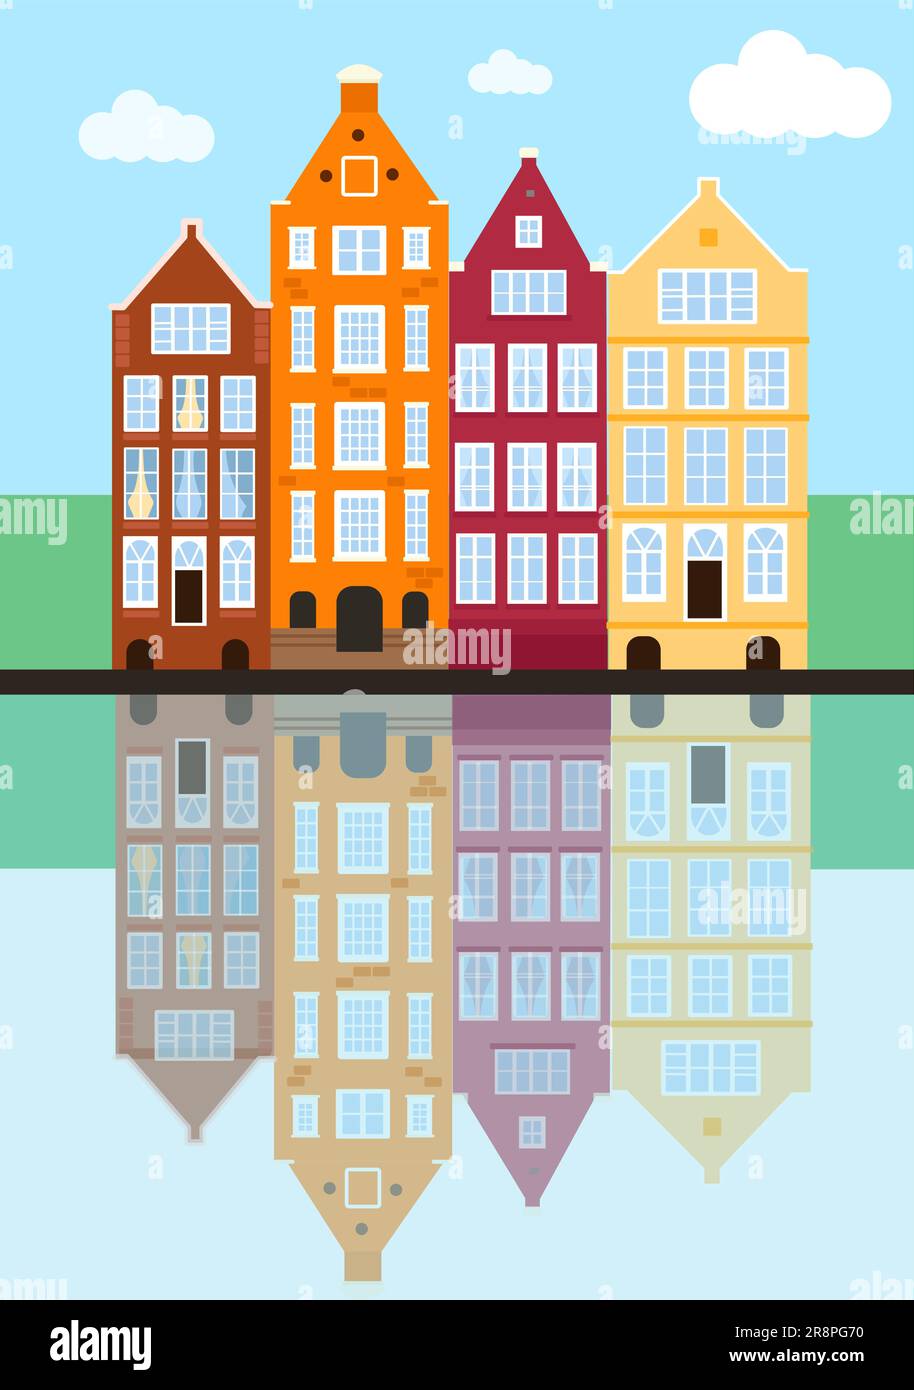 Amsterdam old house in the Dutch style. street in Amsterdam with traditional buildings, reflections in the water, blue sky. vector illustration in fla Stock Vector